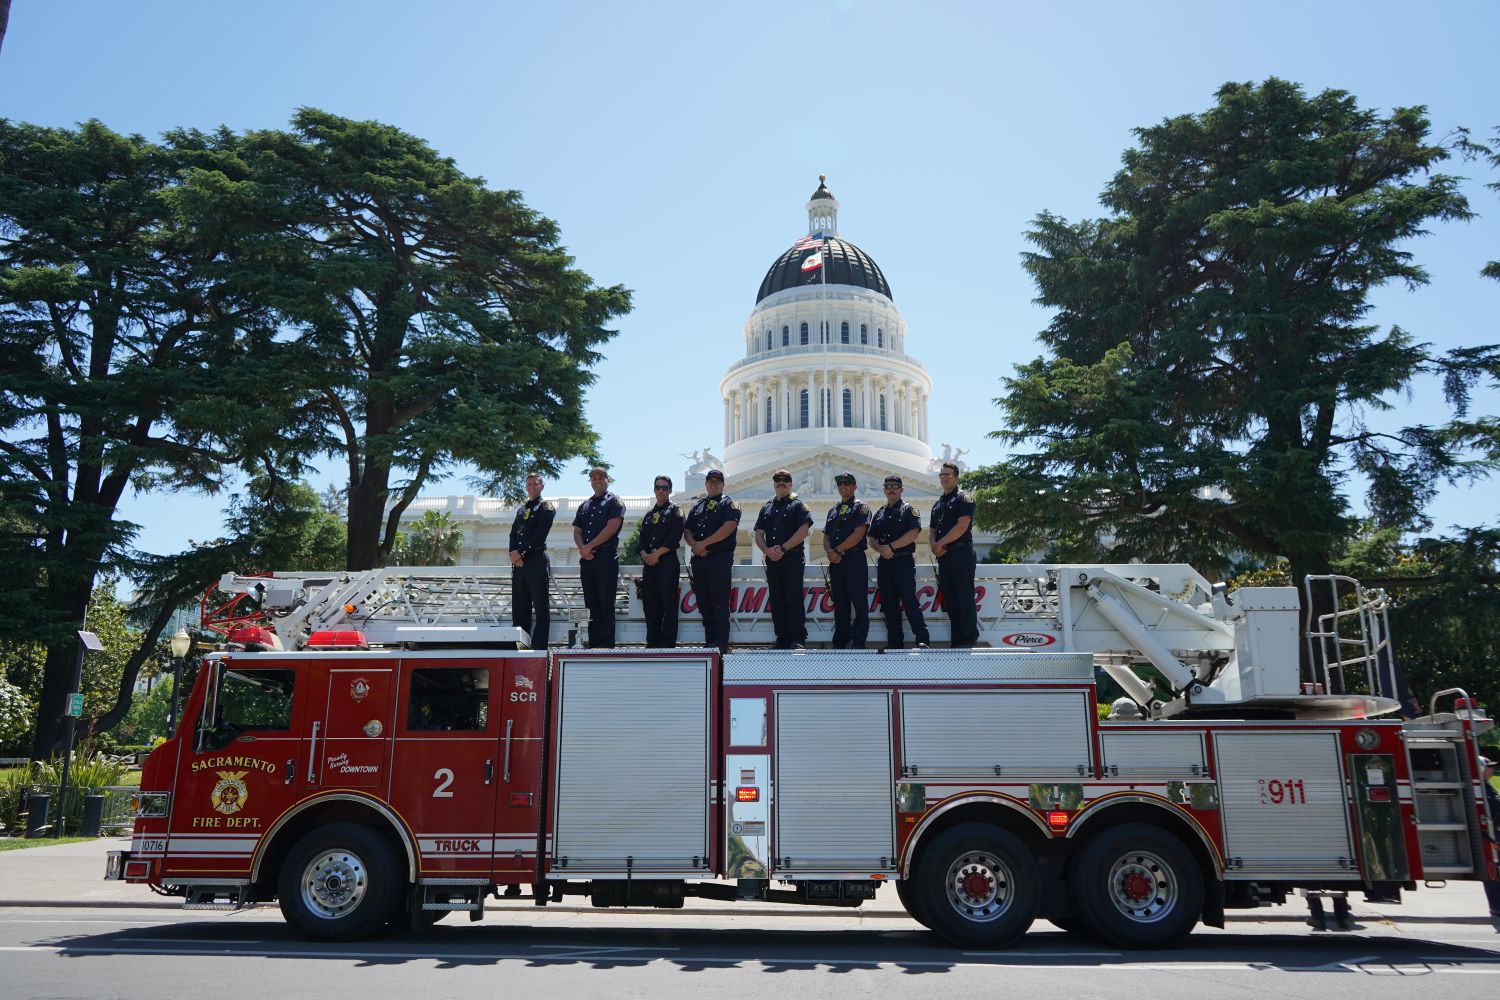 FIRE TRUCK 2 WITH FIREFIGHTERS STANDING ON TOP OF THE TRUCK IN FRONT OF THE CAPITOL